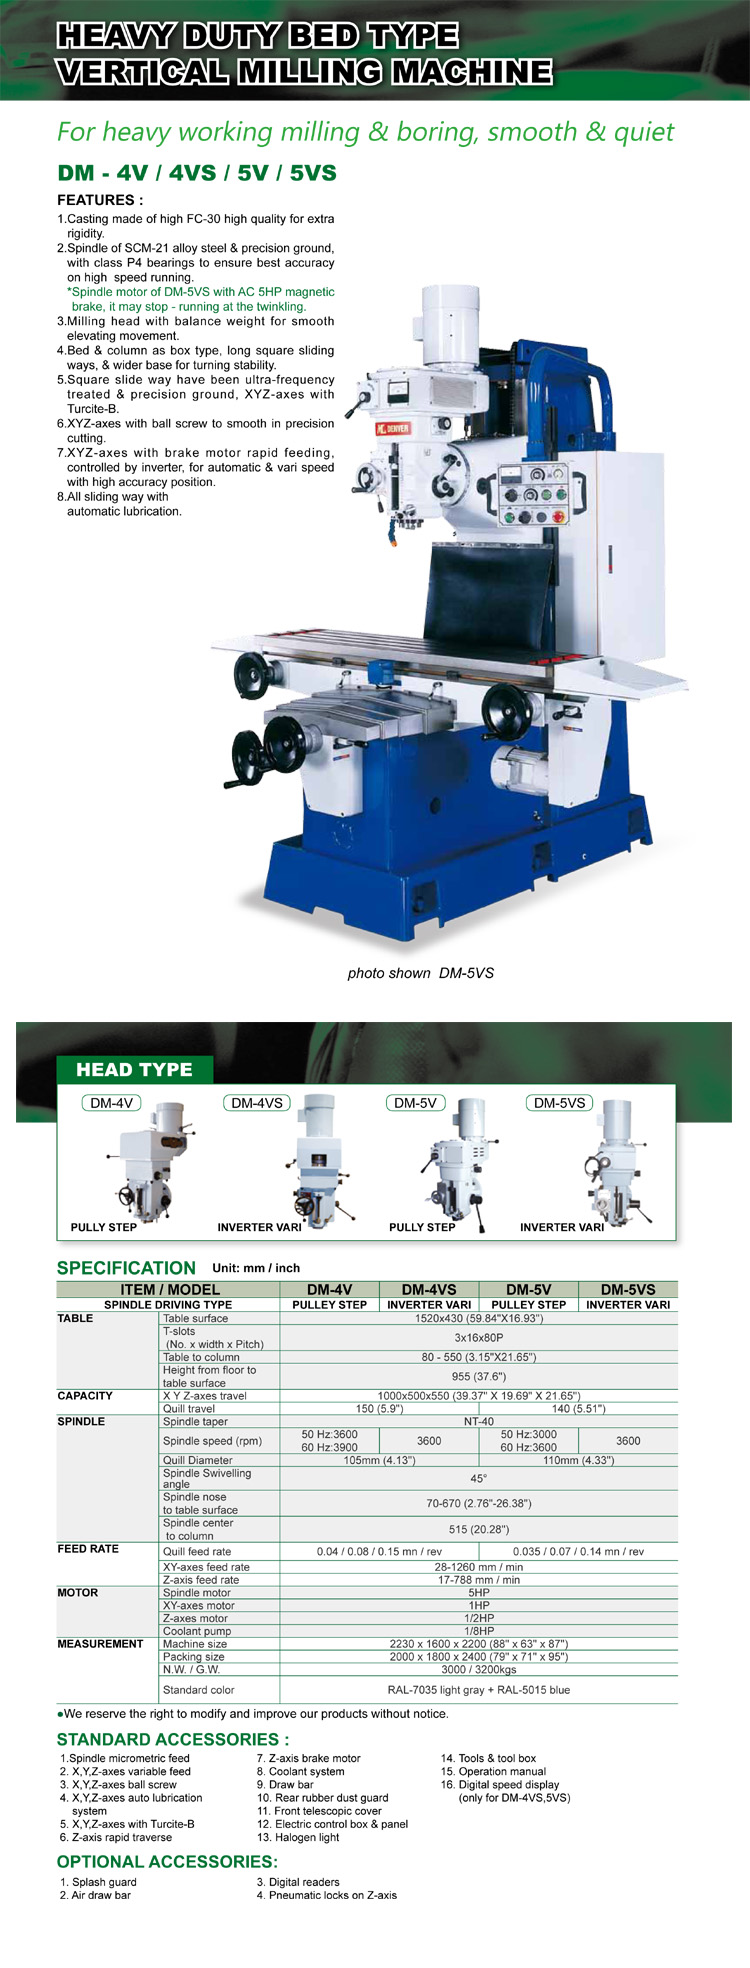 Vertical bed type milling machine